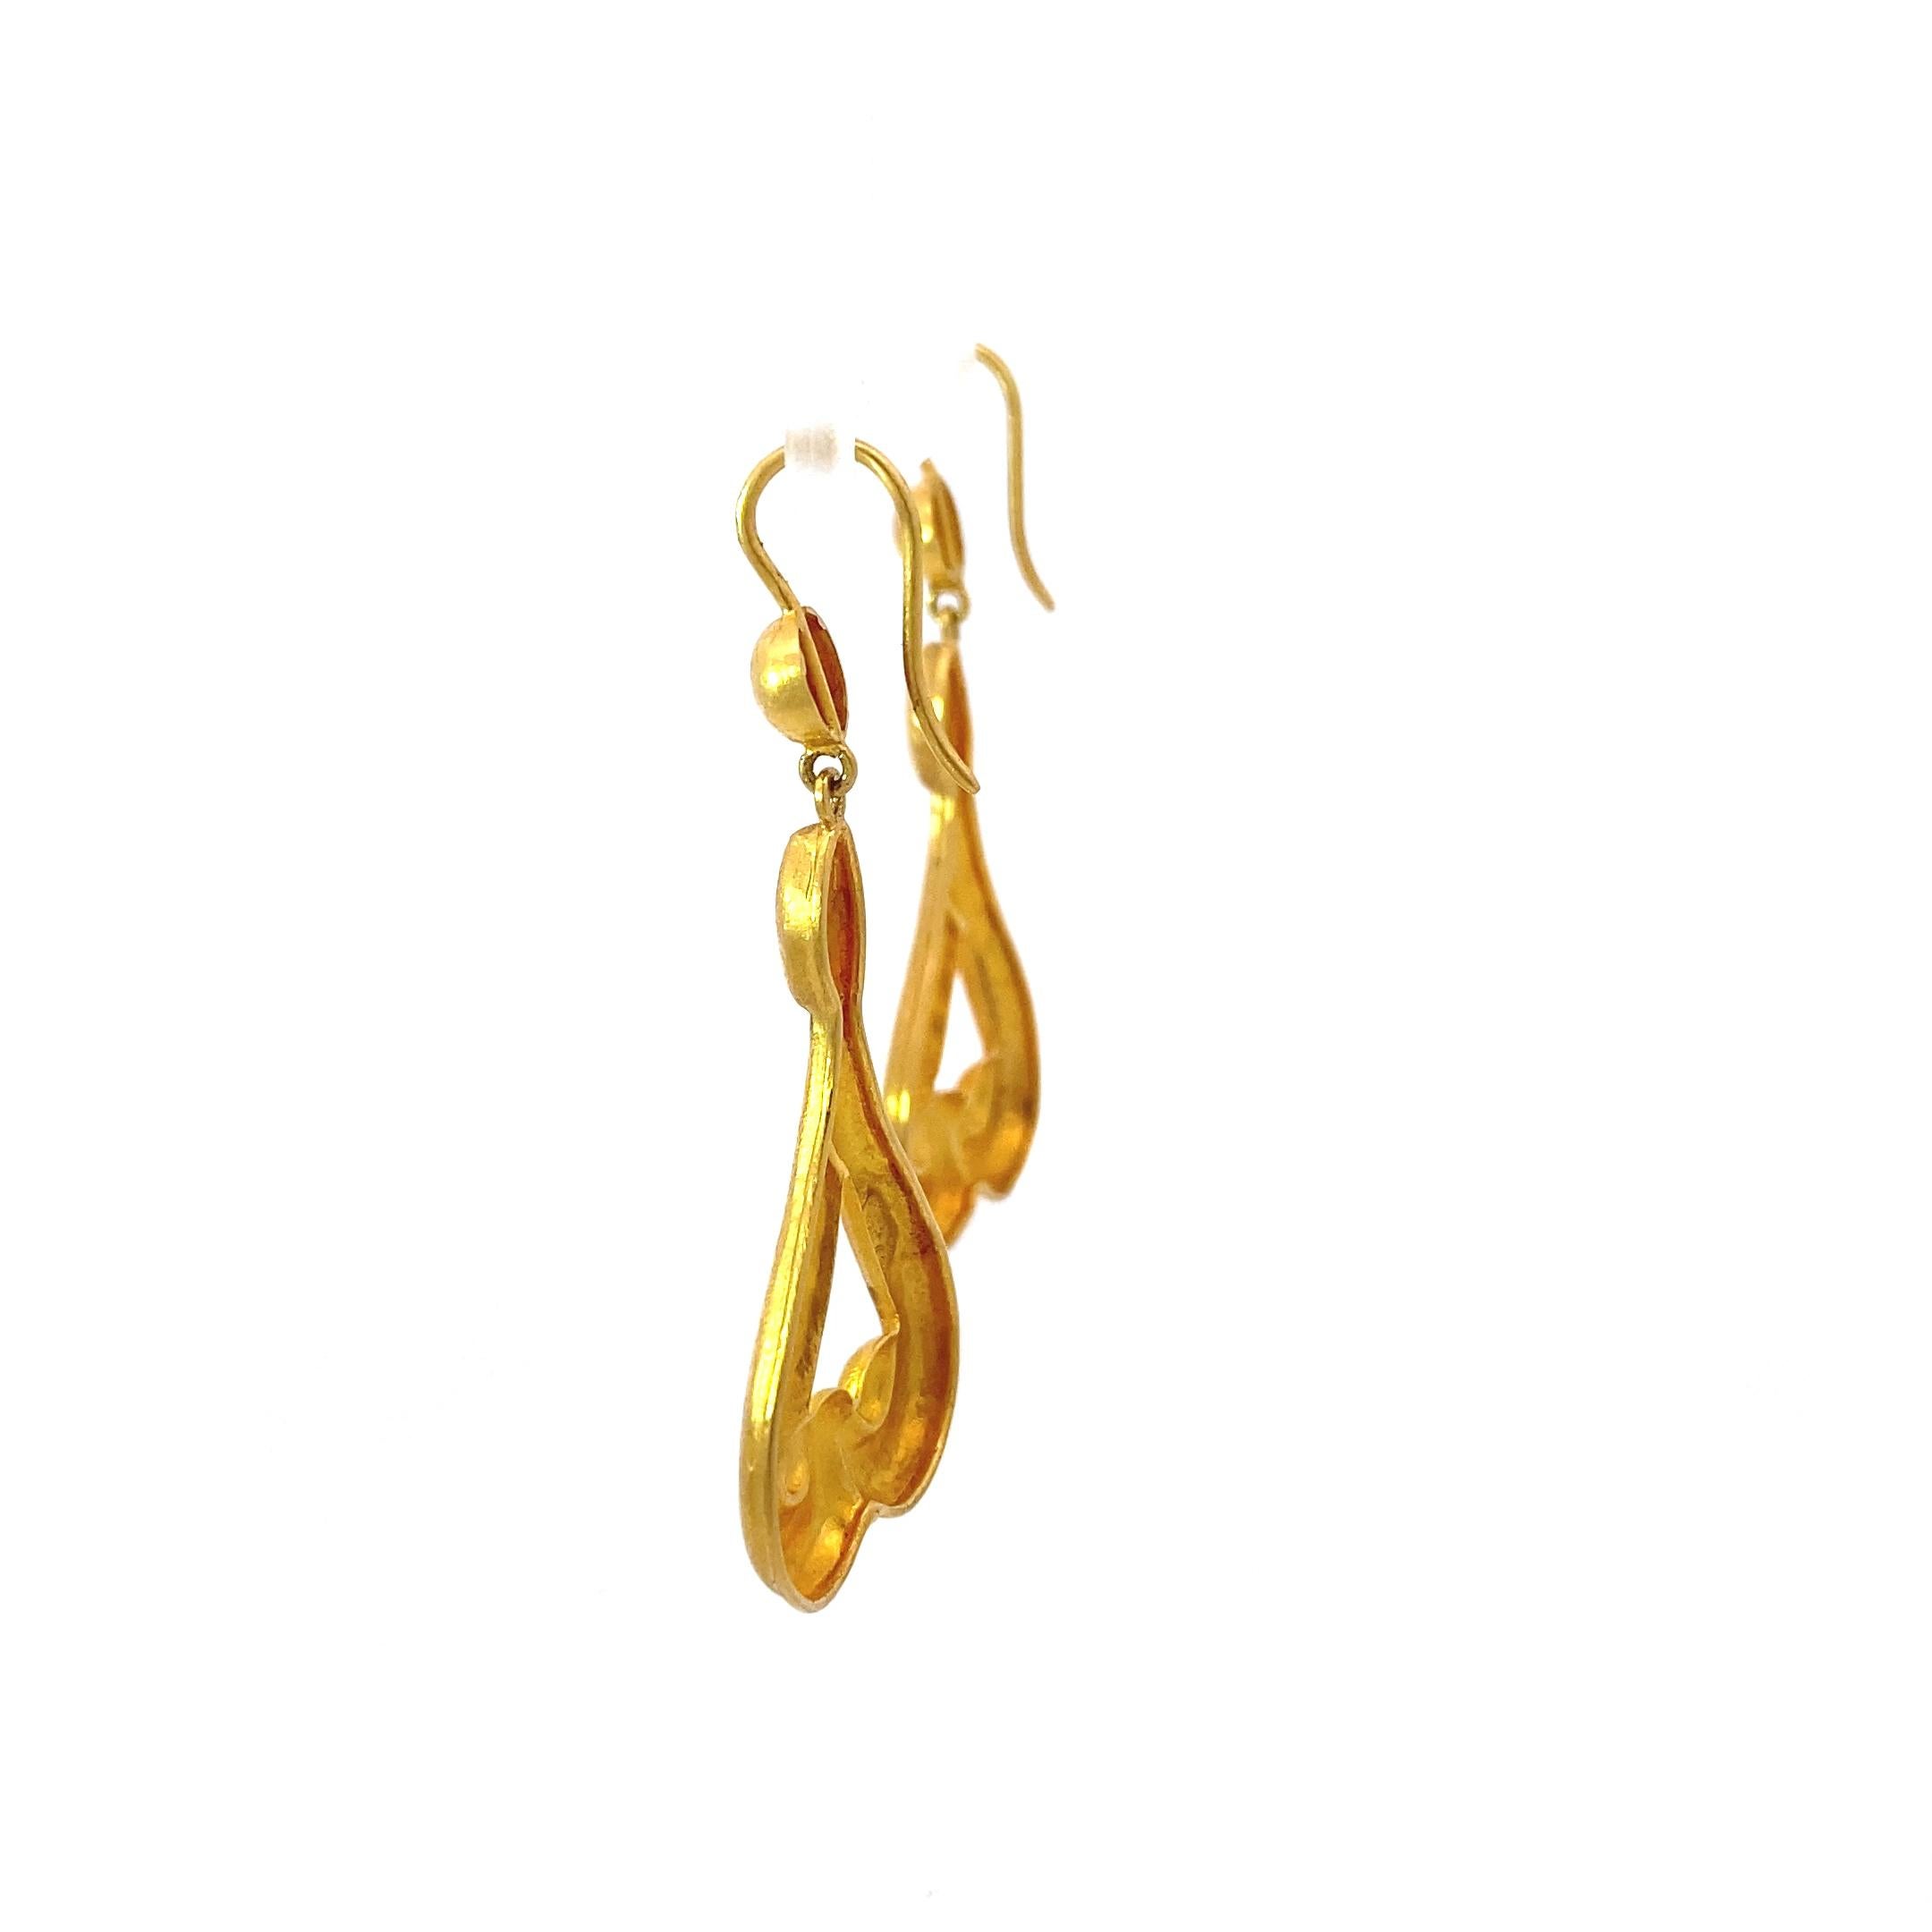 Iconic Greek imagery dangle earrings from jewelry designer LaLaounis. These earrings are an incredibly rich, buttery yellow, mimicking a much higher karat gold as well as ancient jewelry. 

The scroll like, organic triangle shape flatters the face